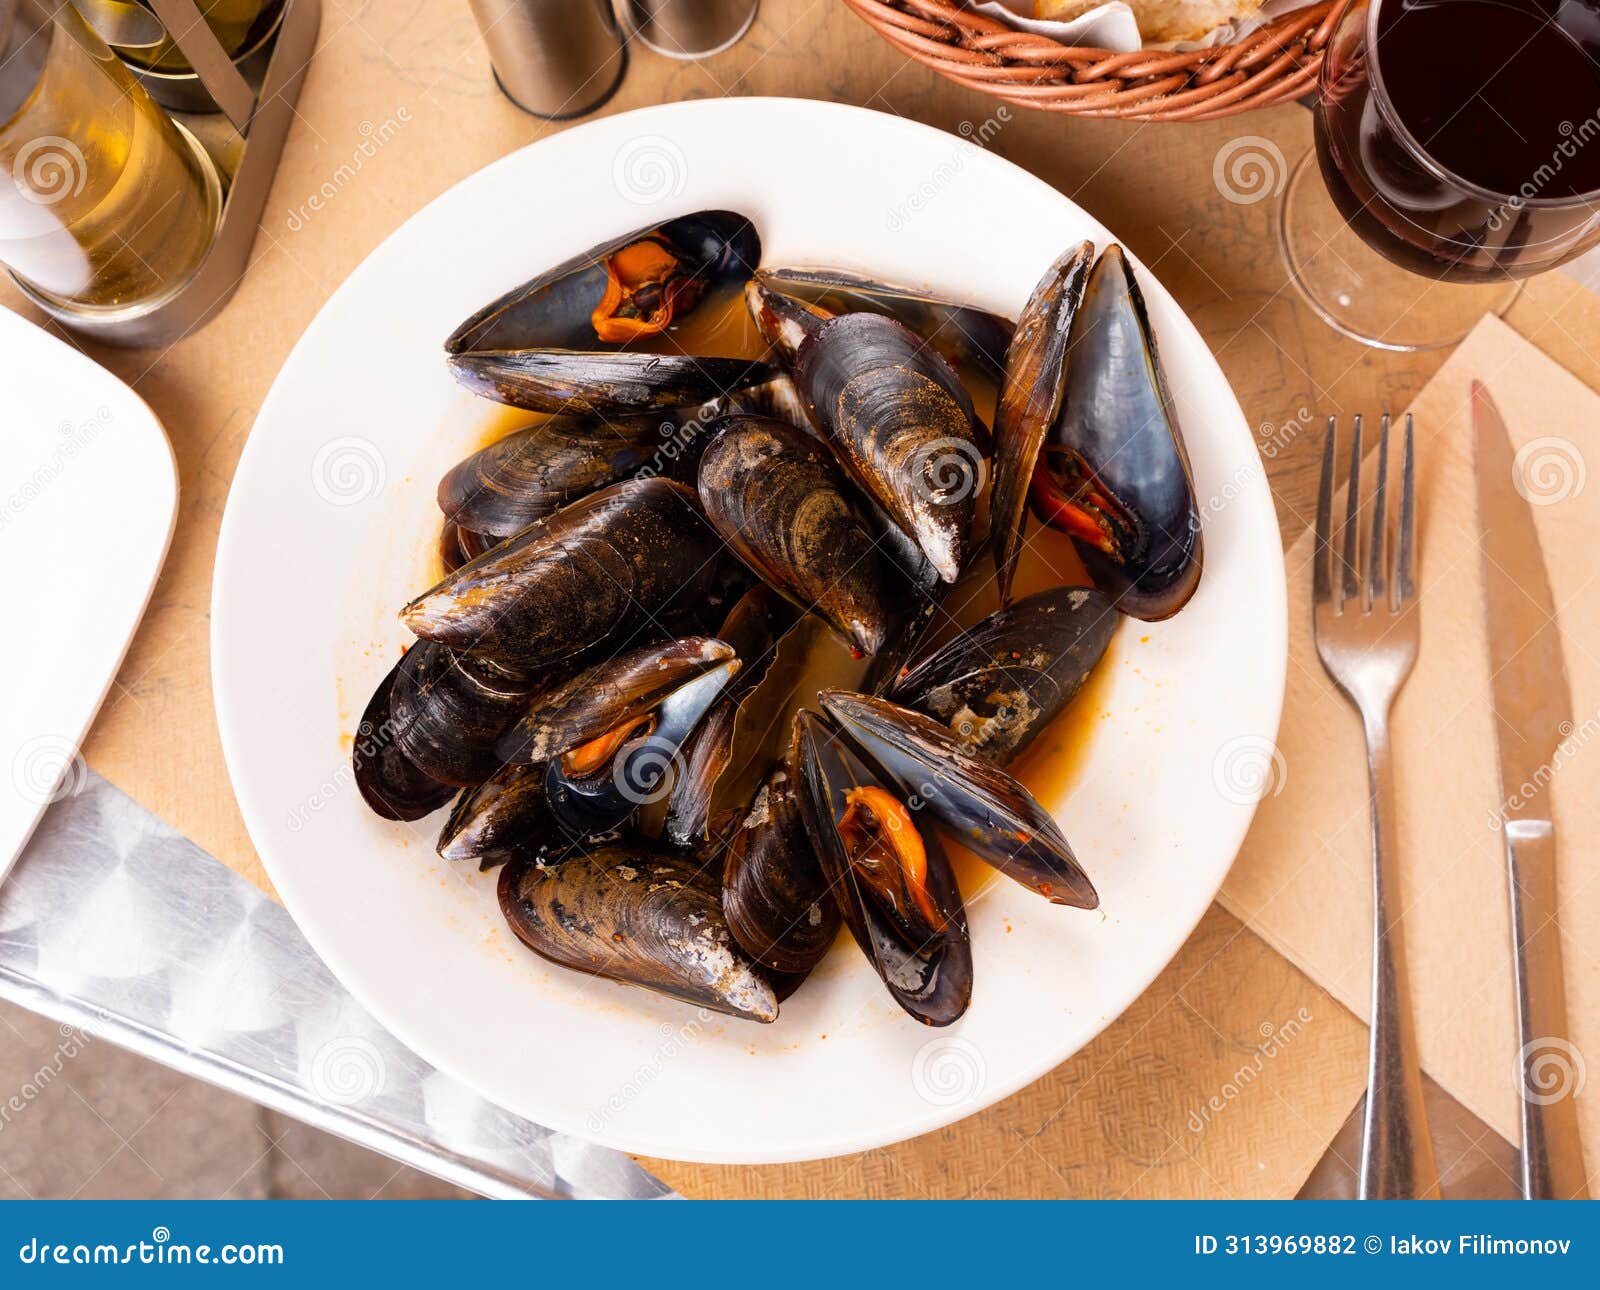 portion of steamed mussels served with bay leaf on plate. spanish dish mejillon la marinera